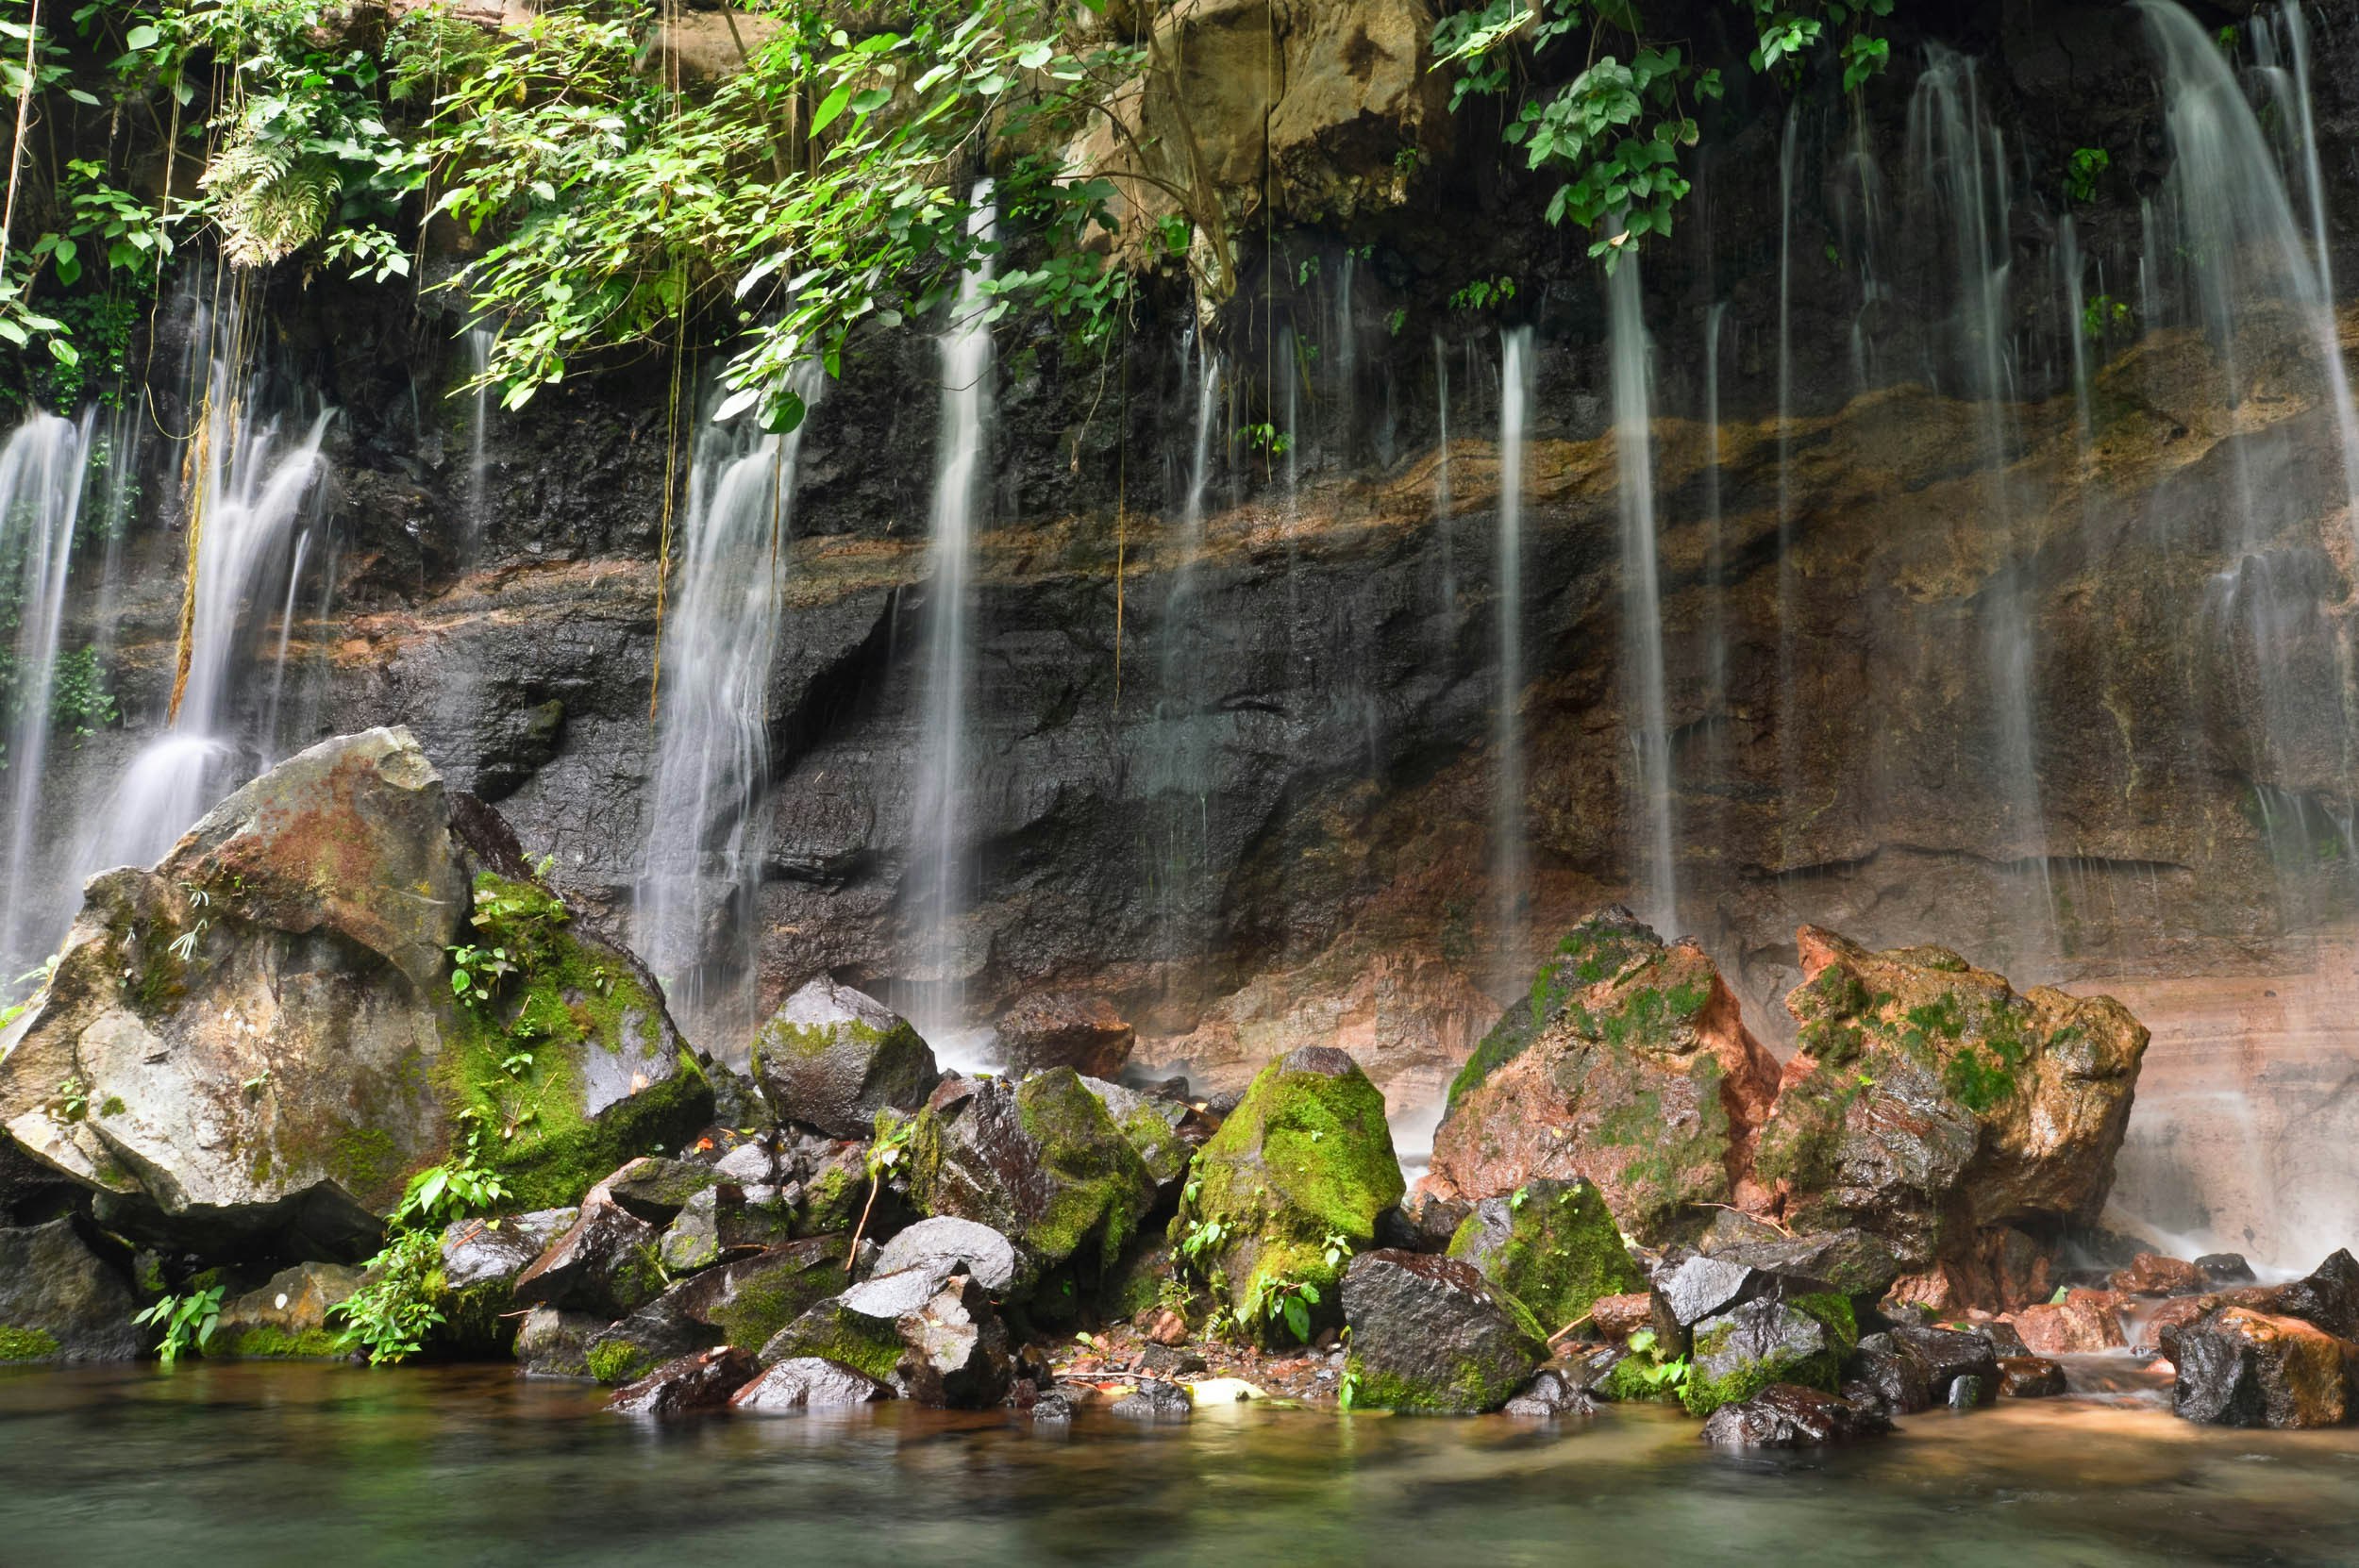 A small water fall pools into a shallow body of water and on to a collection of medium-sized moss-covered rocks and small vegetation.